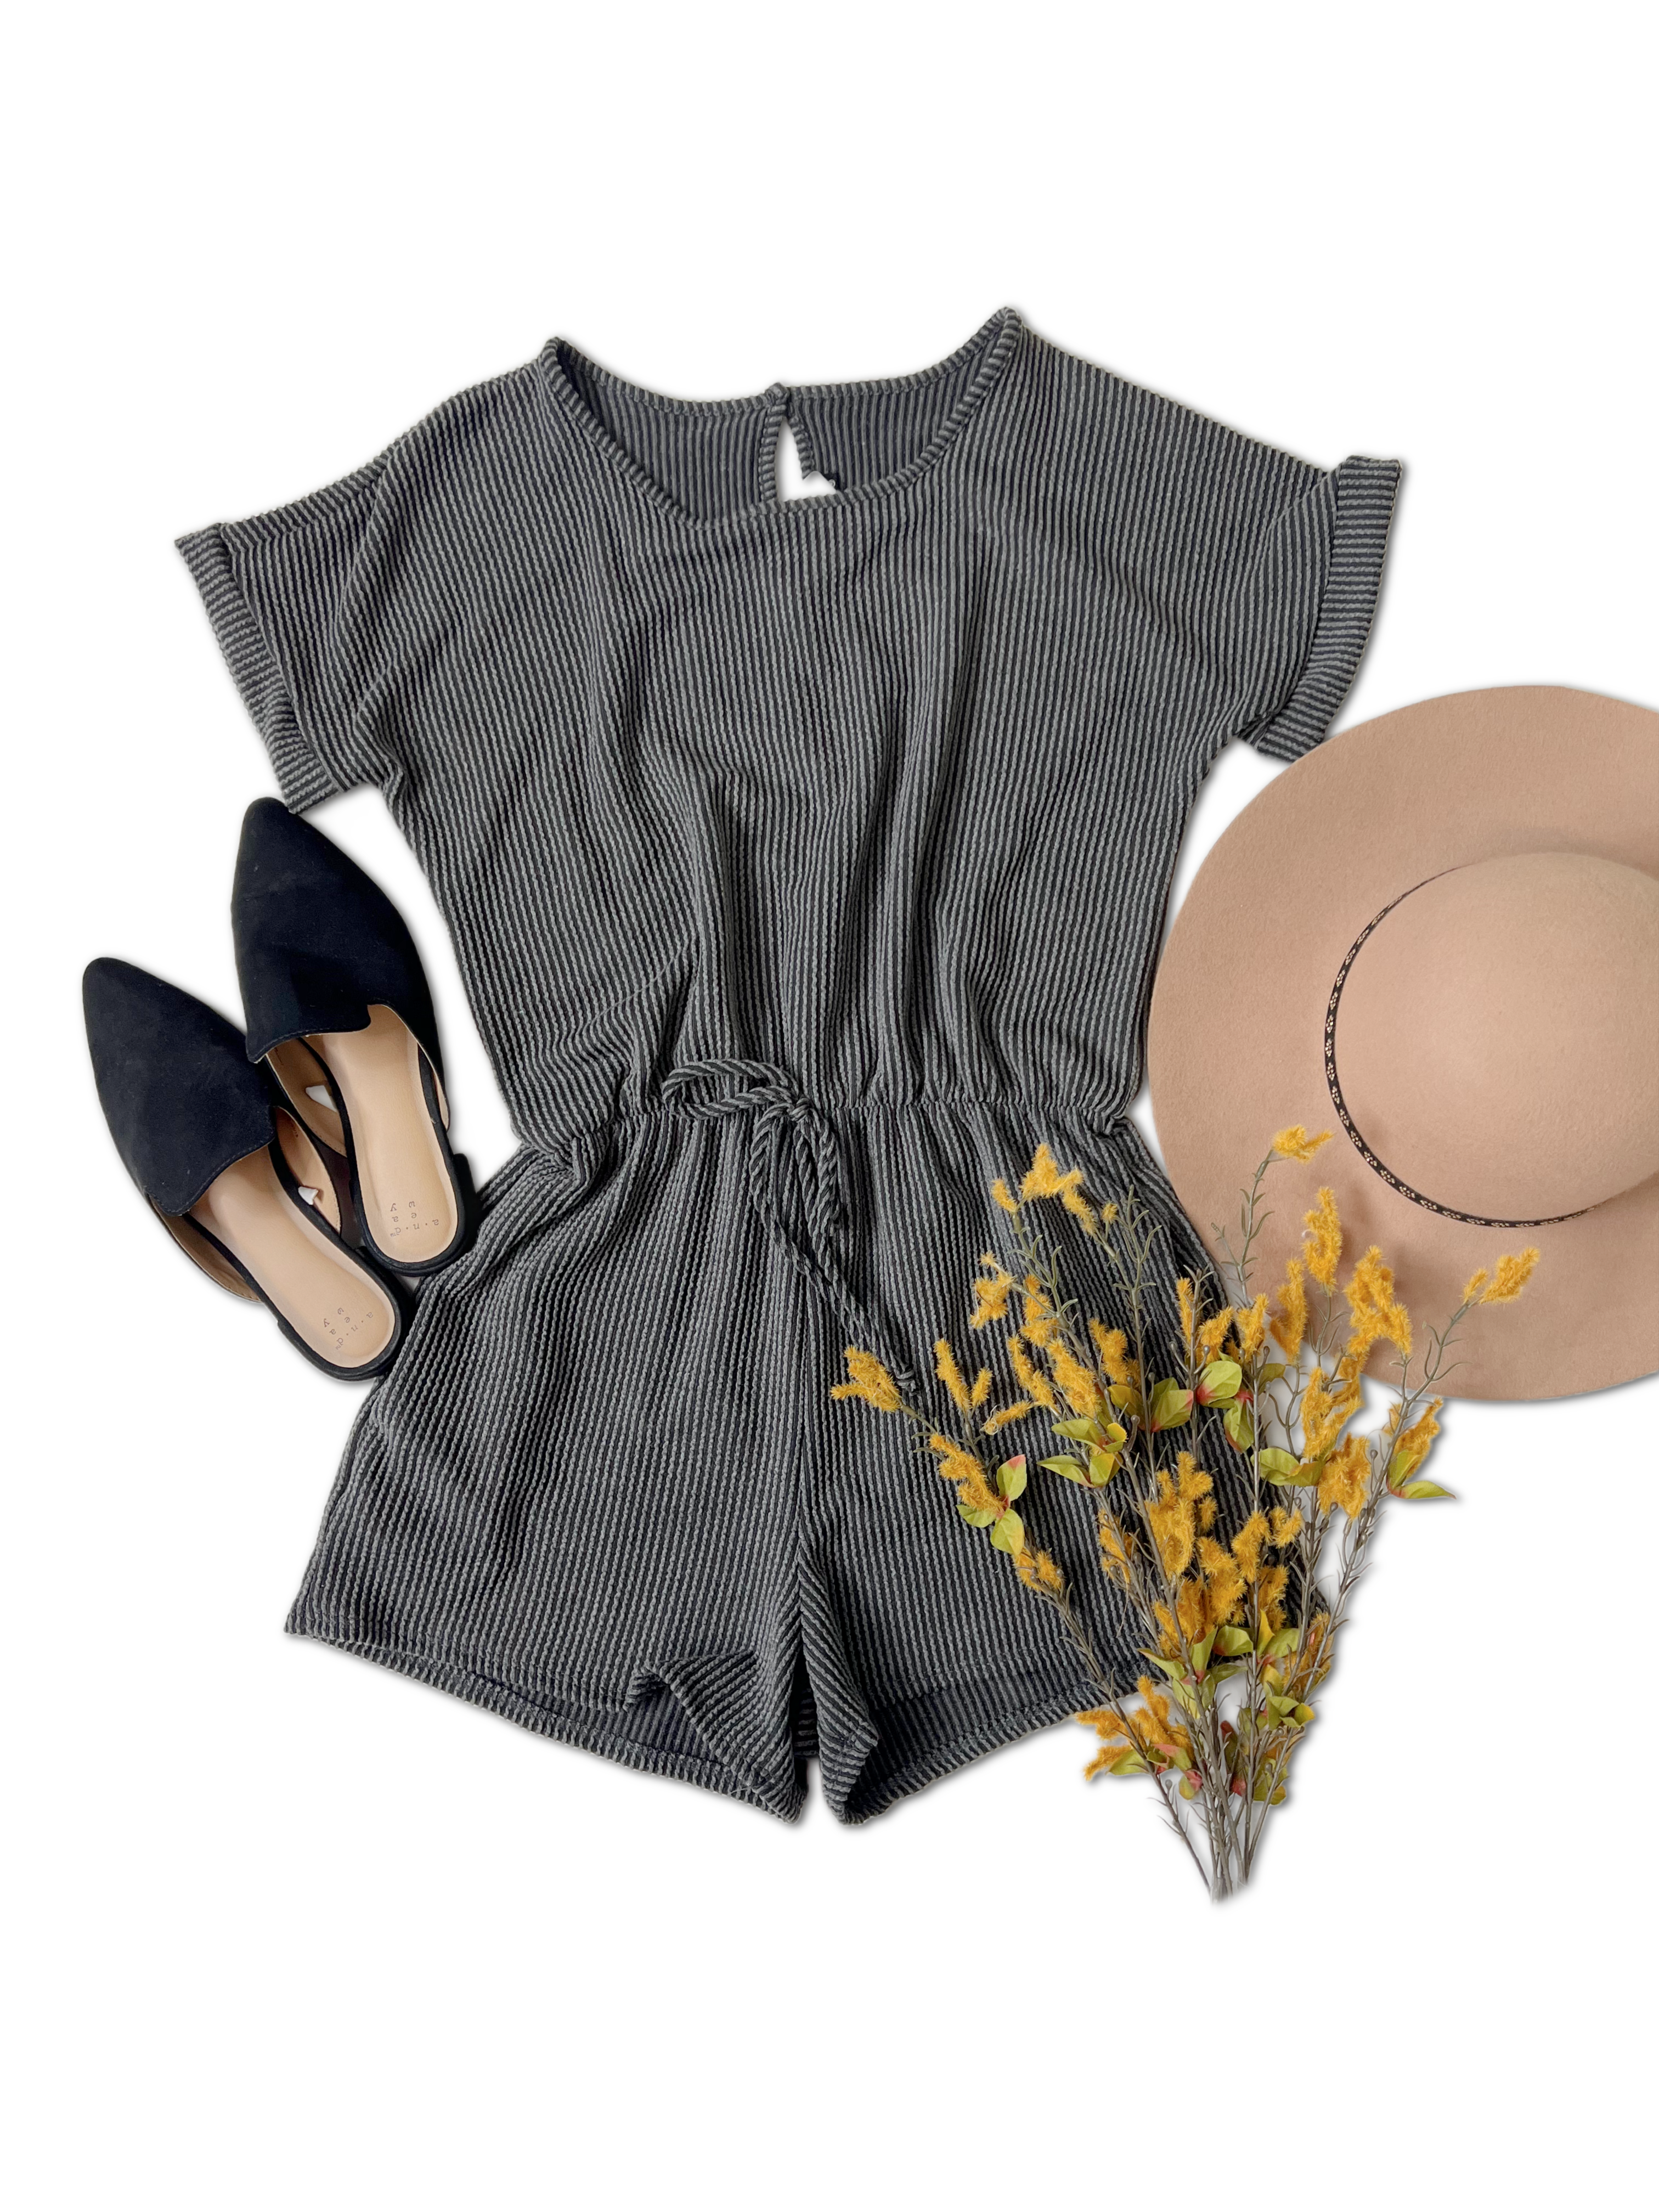 Catch a Good Time - Charcoal Romper